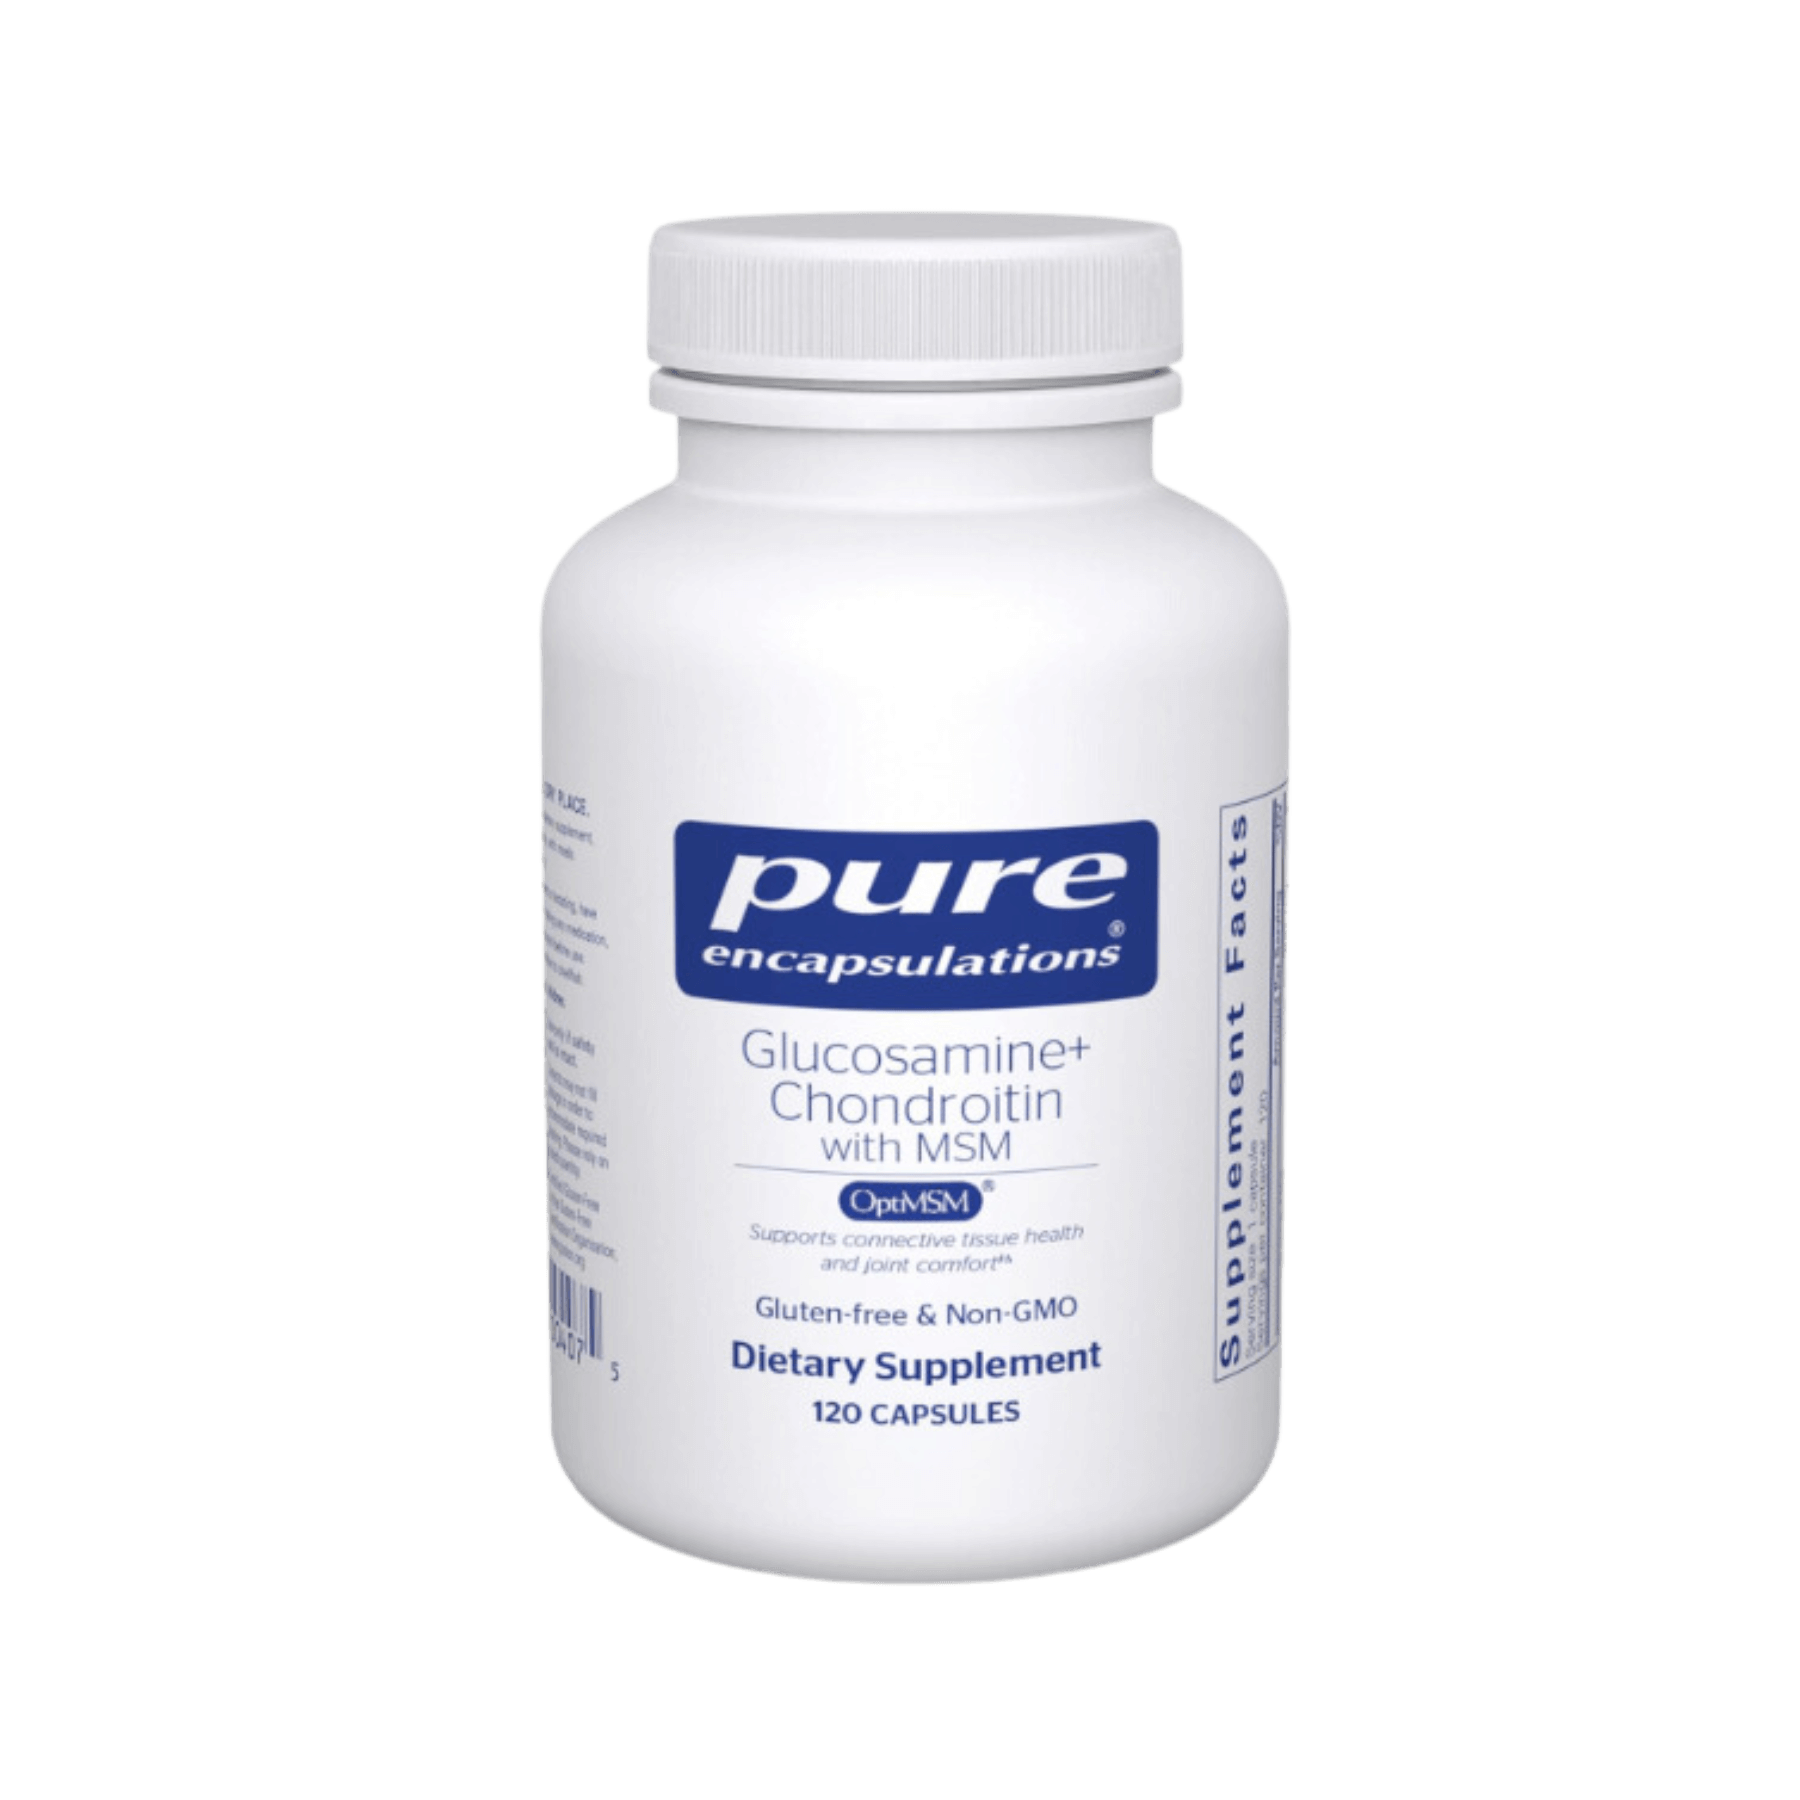 Pure Encapsulations Glucosamine Chondroitin with MSM Capsules